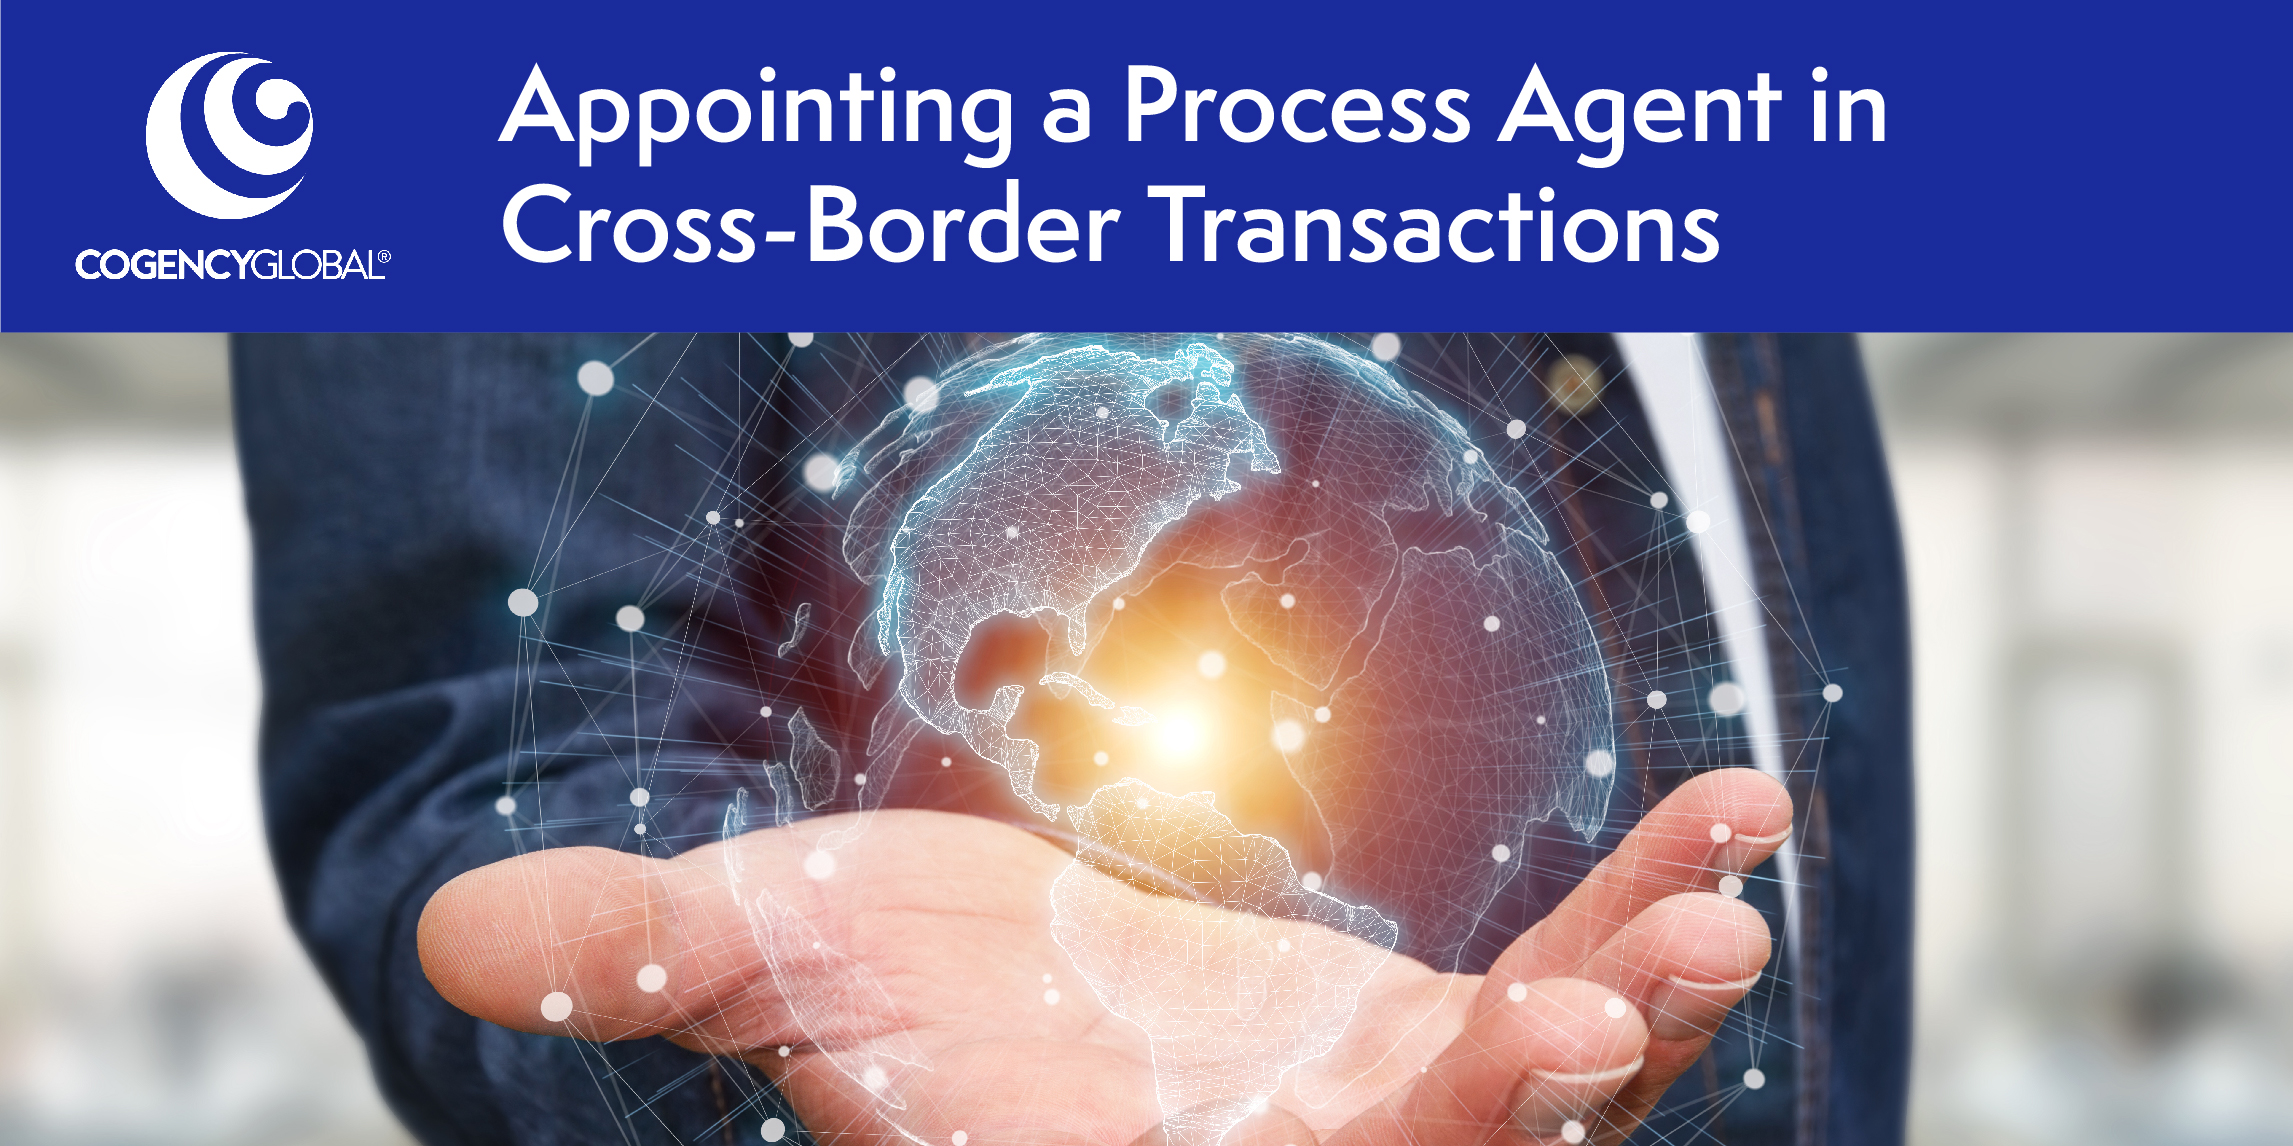 Appointing a Process Agent in Cross-Border Transactions